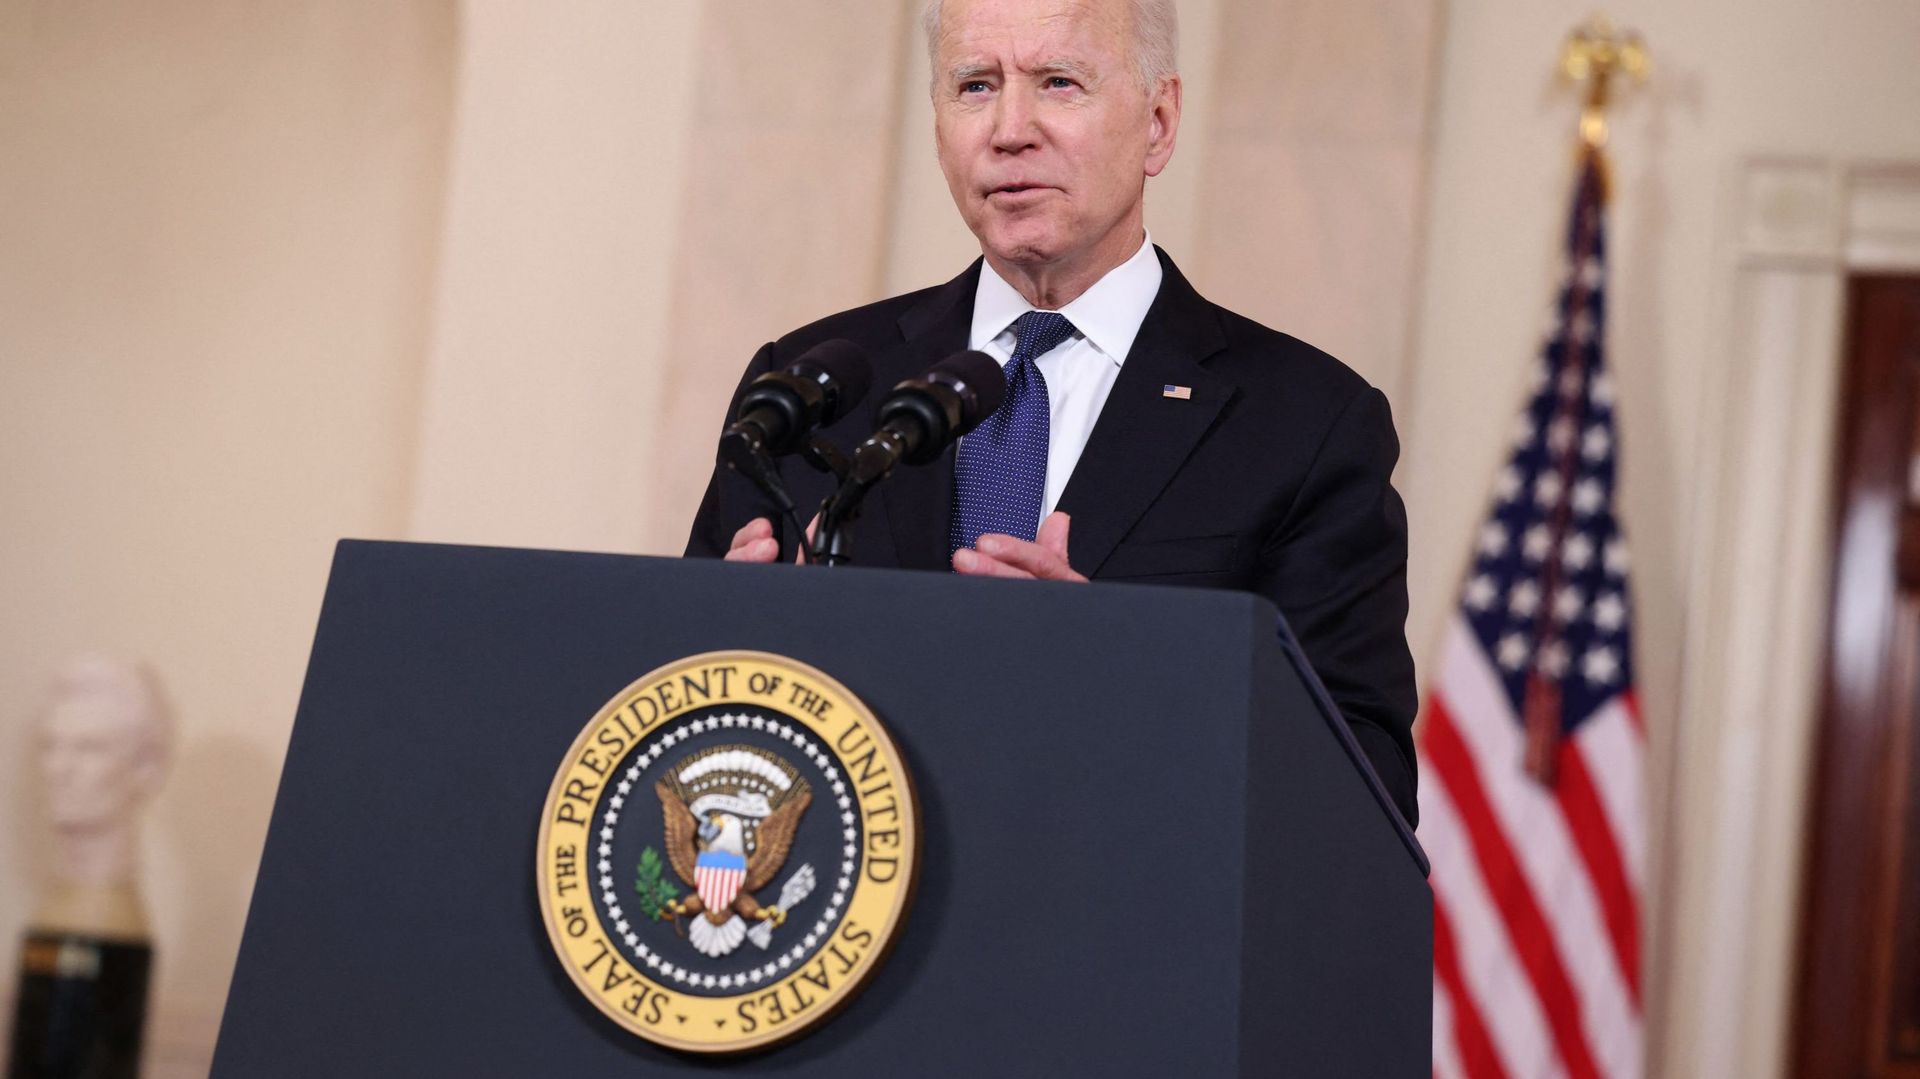 President Biden Delivers Remarks On Conflict In Middle East